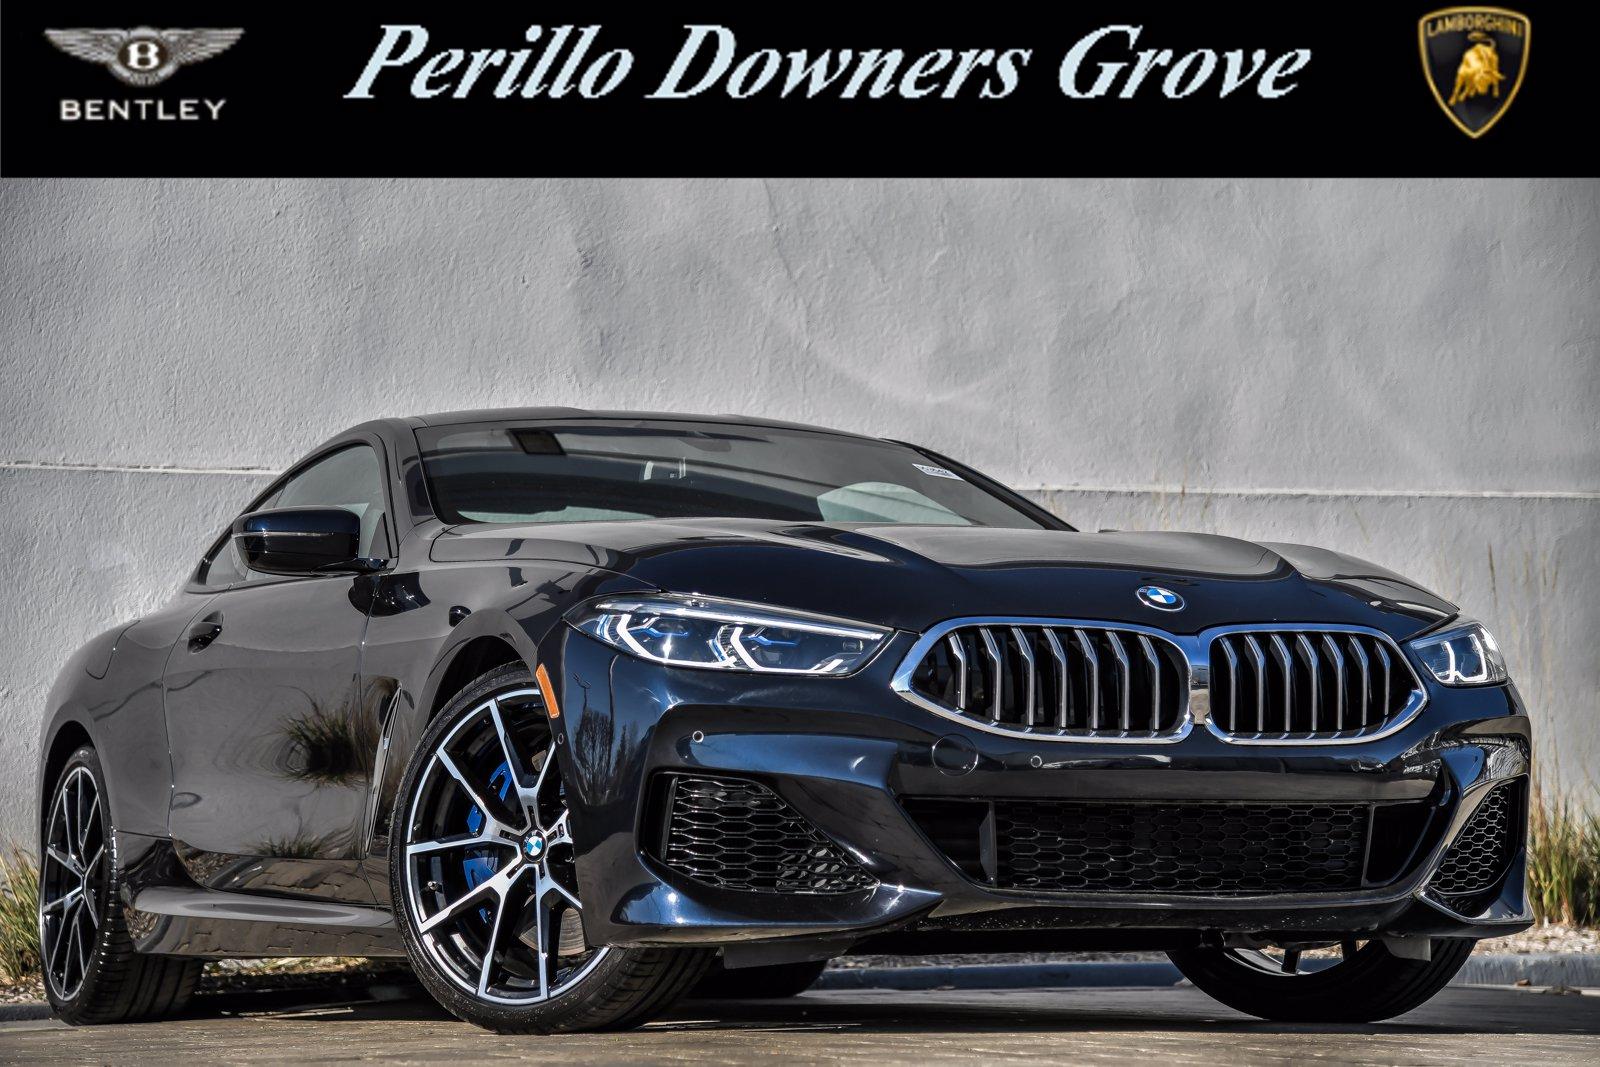 Used 2020 BMW 8 Series 840i M-Sport Coupe | Downers Grove, IL